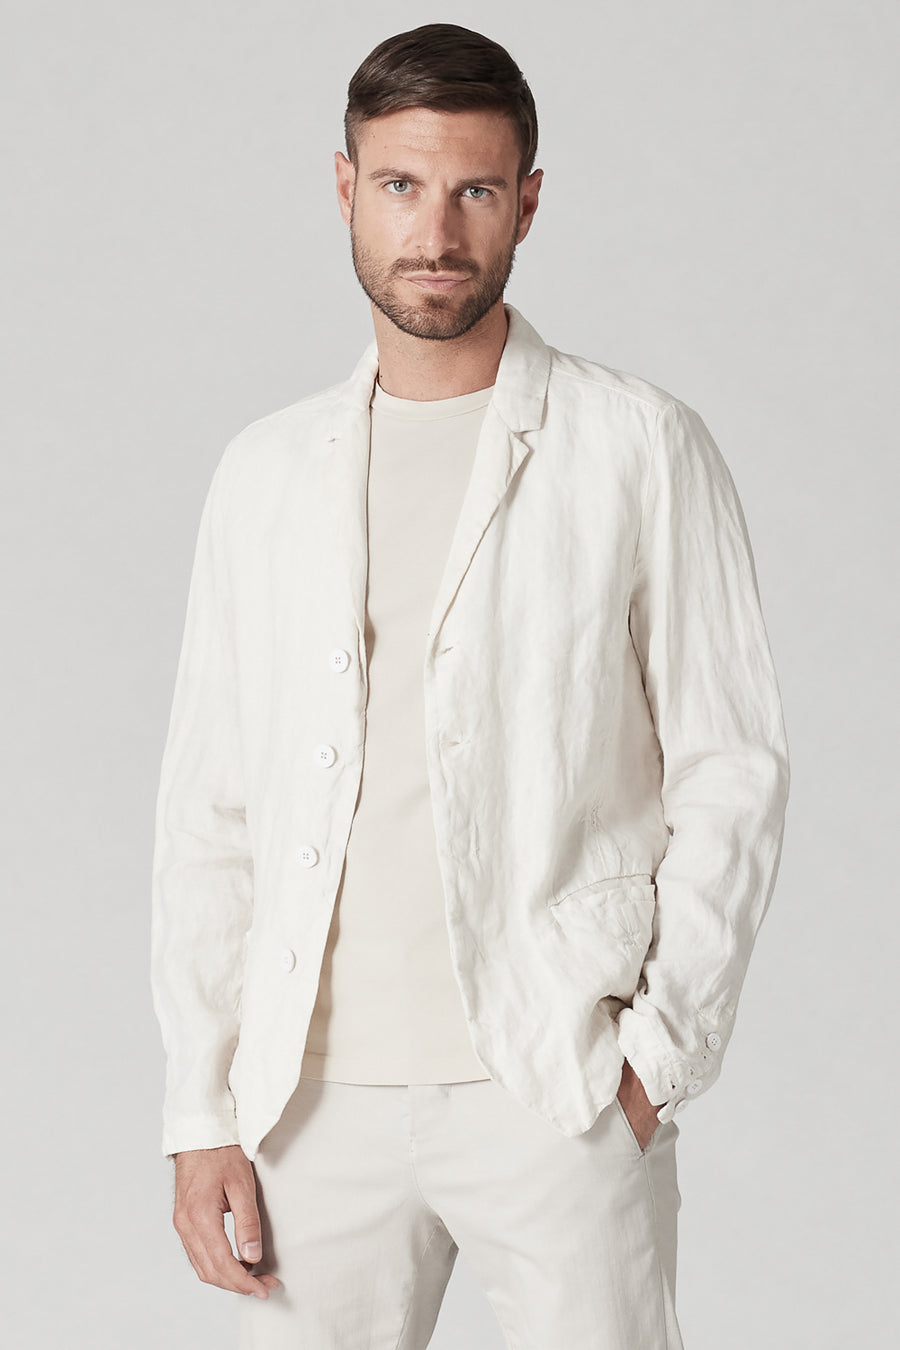 Buy the Transit Regular-fit Lightweight Linen Jacket in Ice at Intro. Spend £50 for free UK delivery. Official stockists. We ship worldwide.